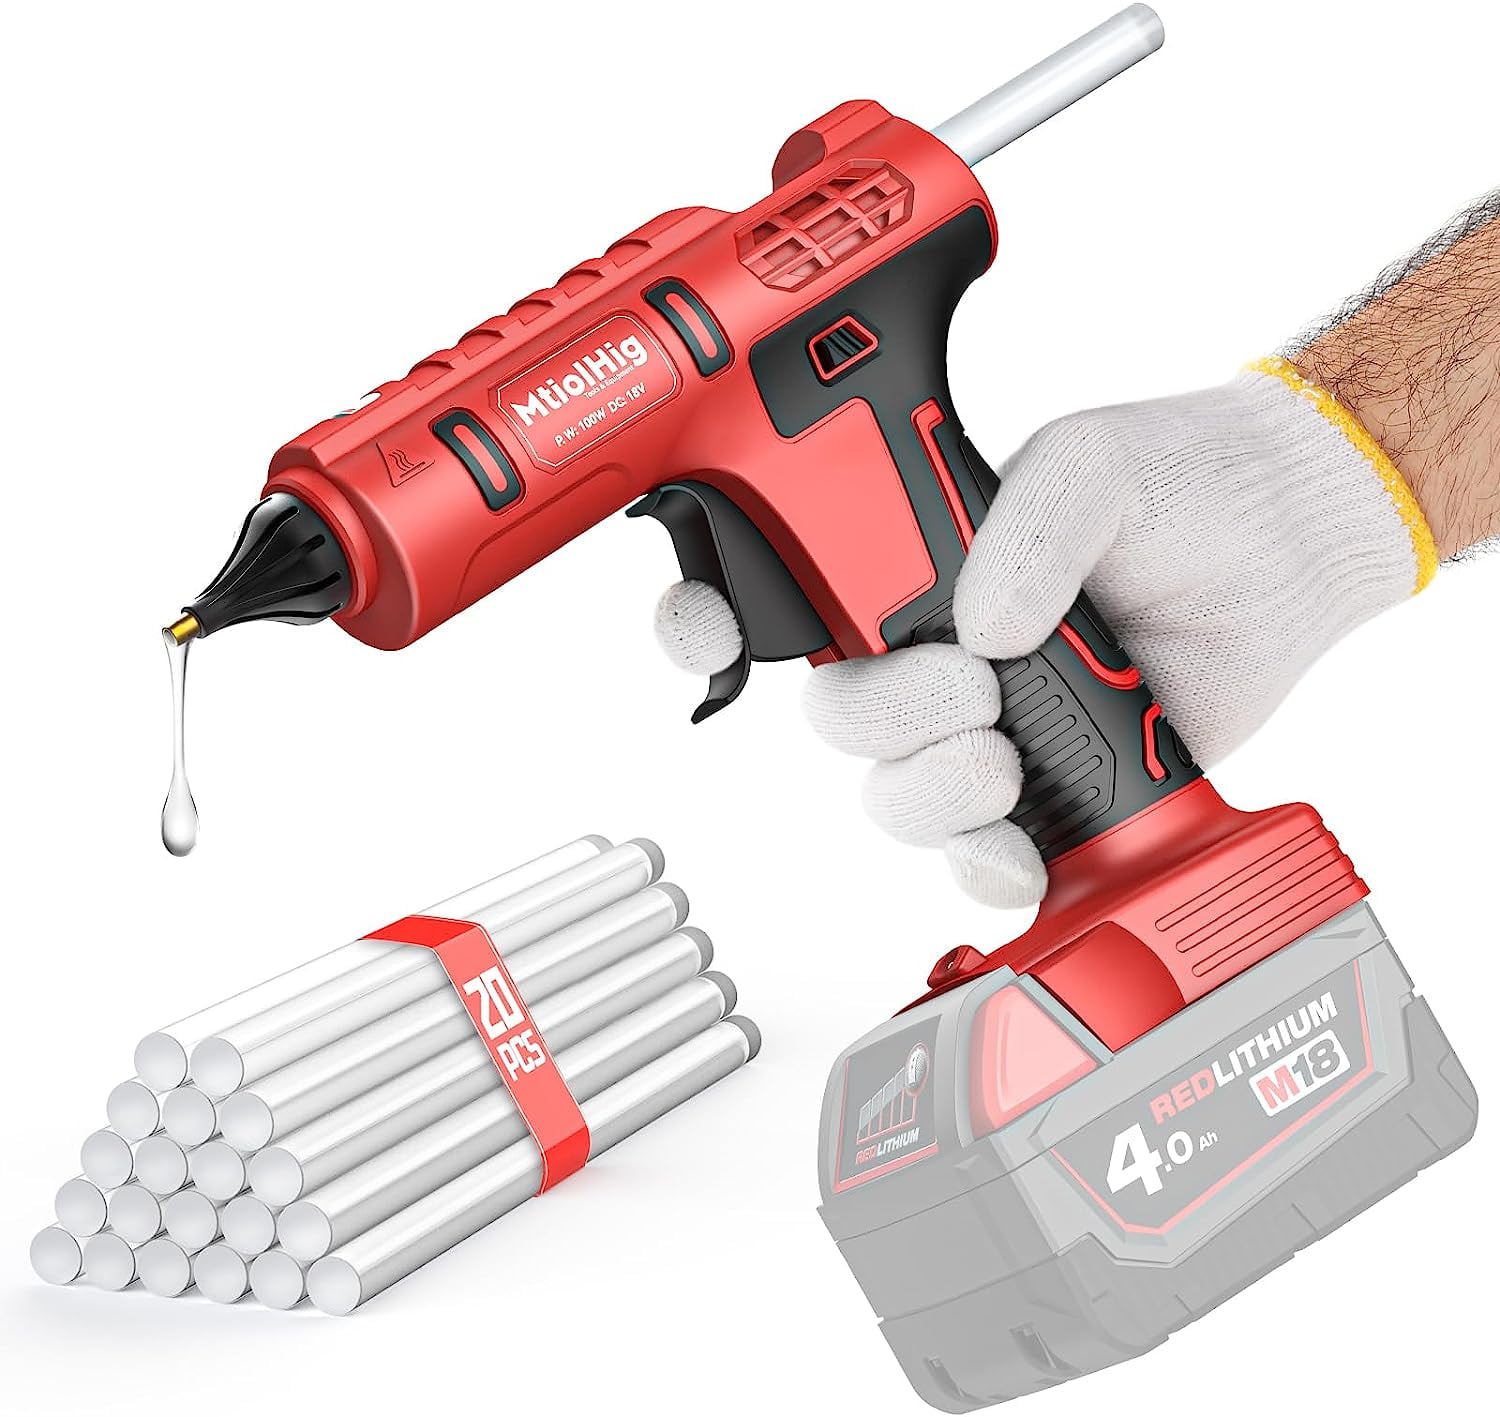  Cordless Hot Glue Gun for Milwaukee M18, Handheld Glue Gun for  Milwaukee 18V Max Li-ion Battery, 30s Quick Preheat, for Arts & Crafts &  DIY with 30 Glue Sticks (Tool Only) 